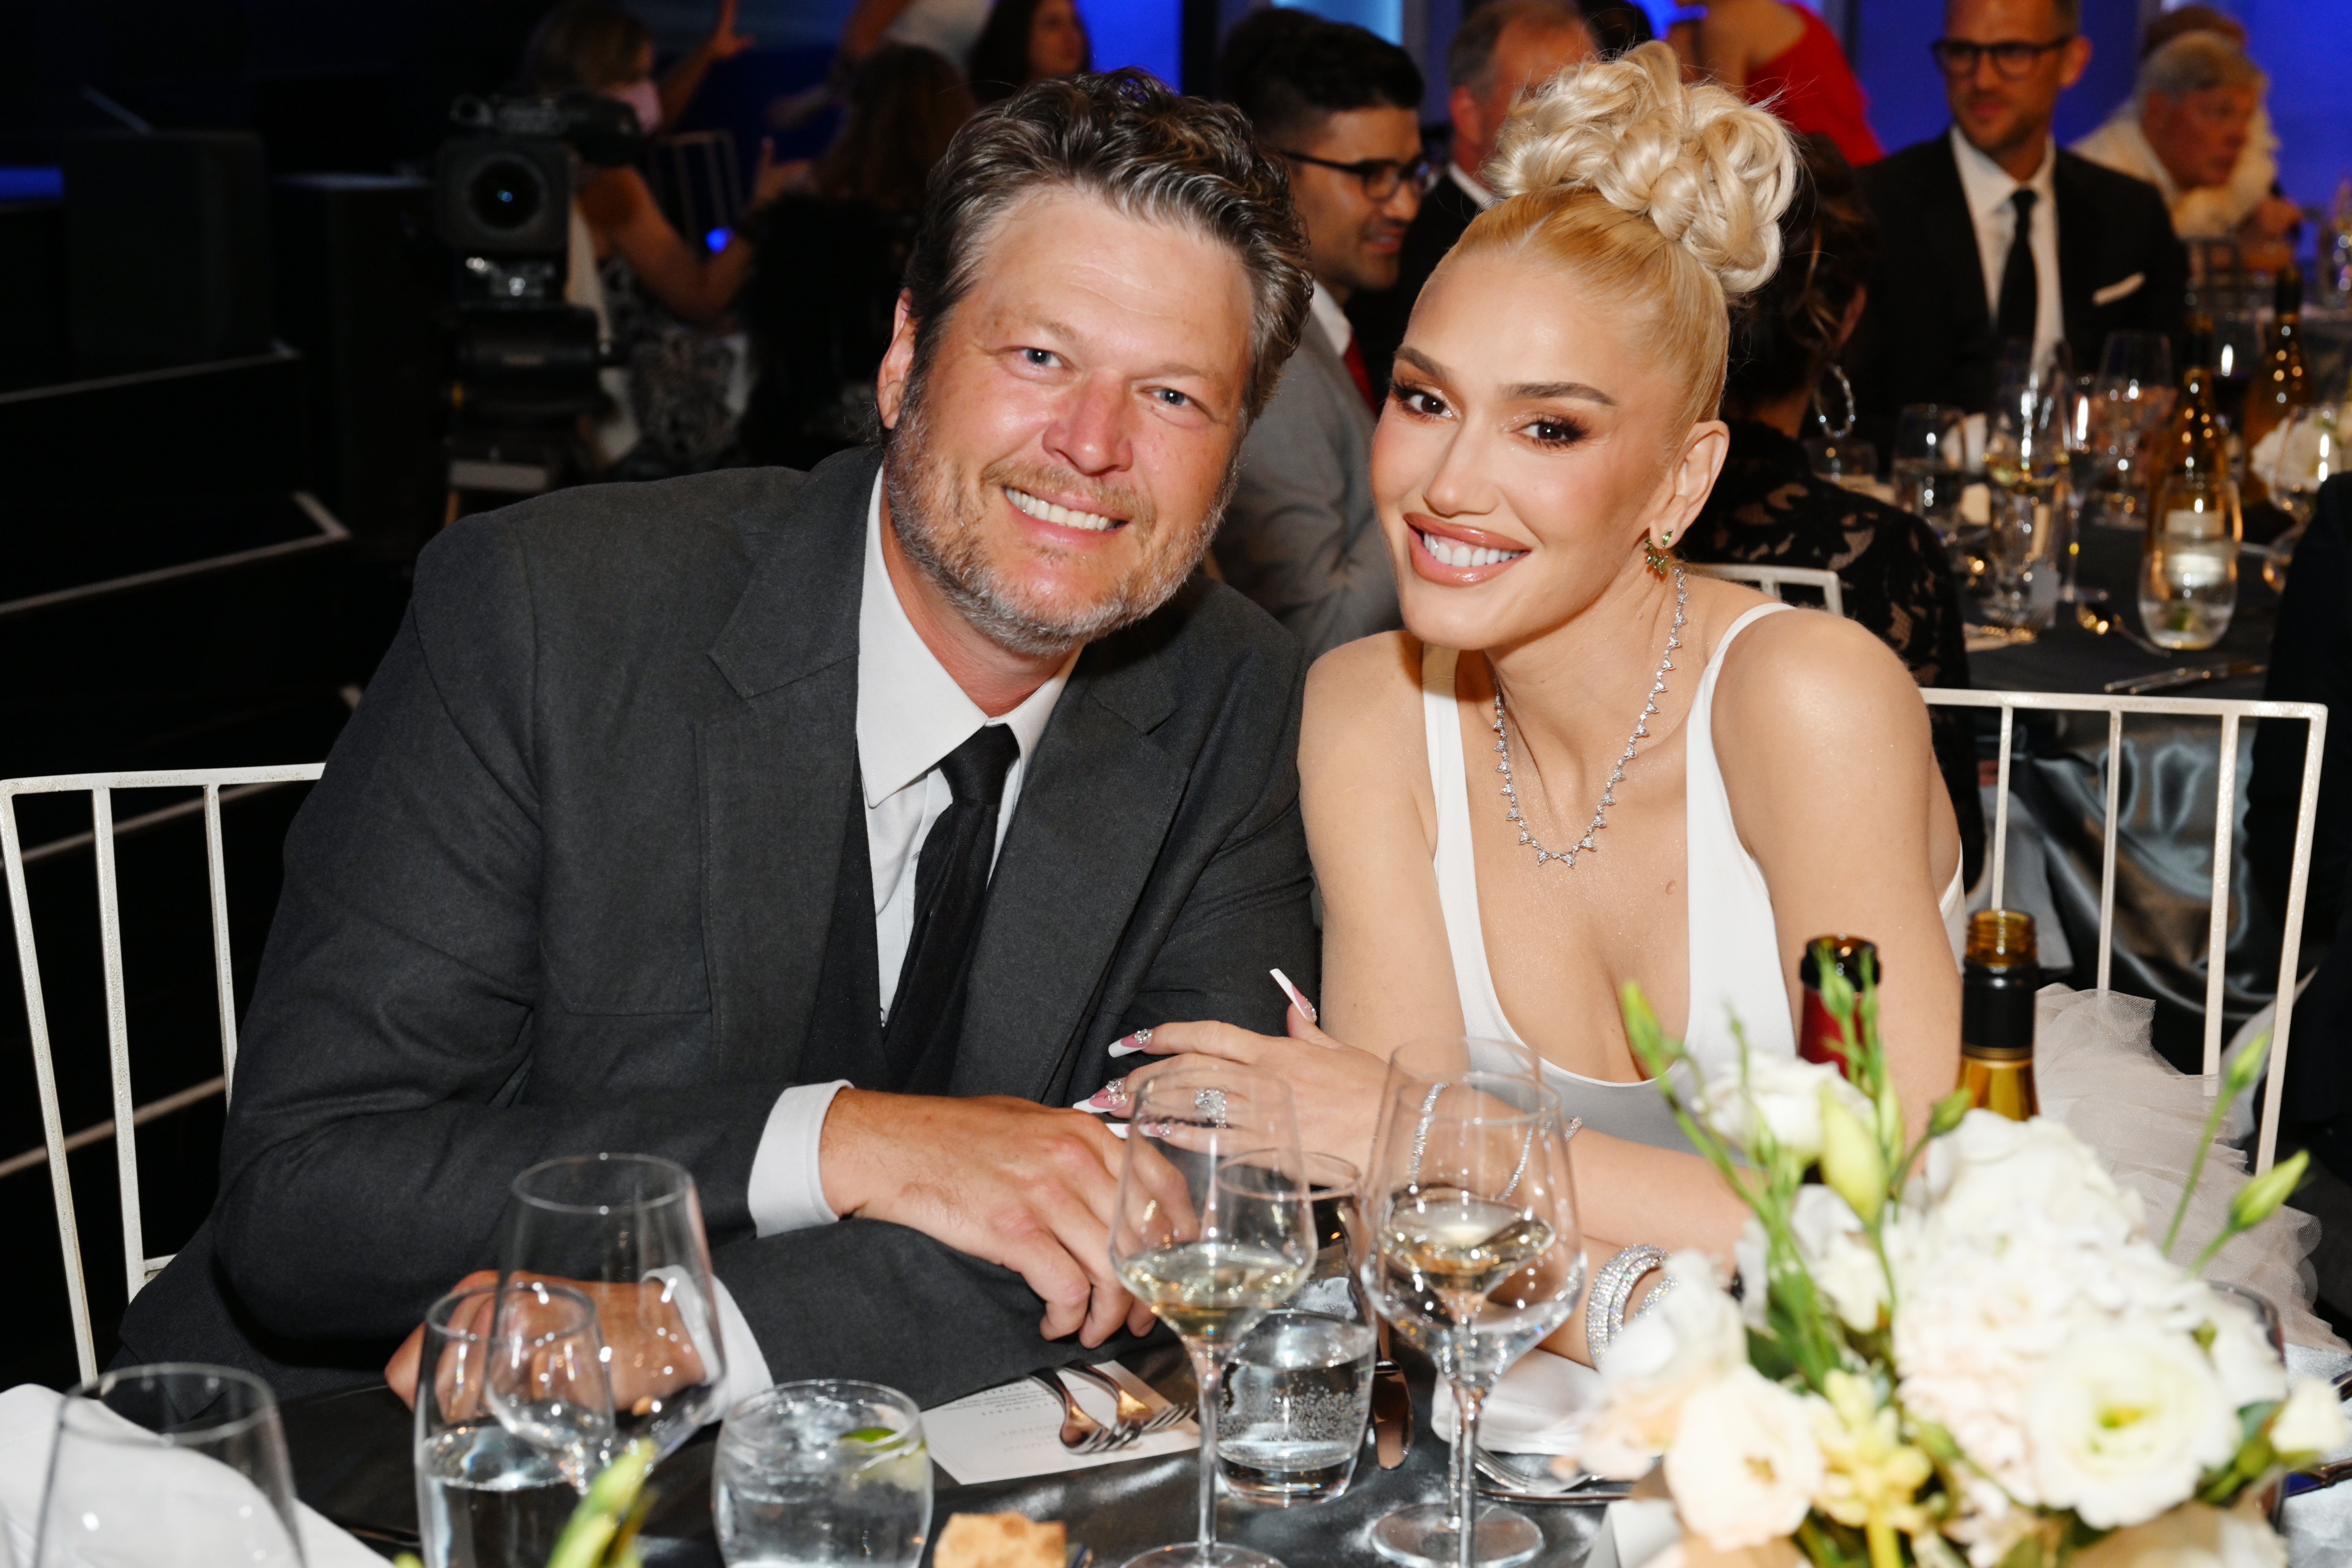 Some fans accused Gwen of deleting social media posts with her husband